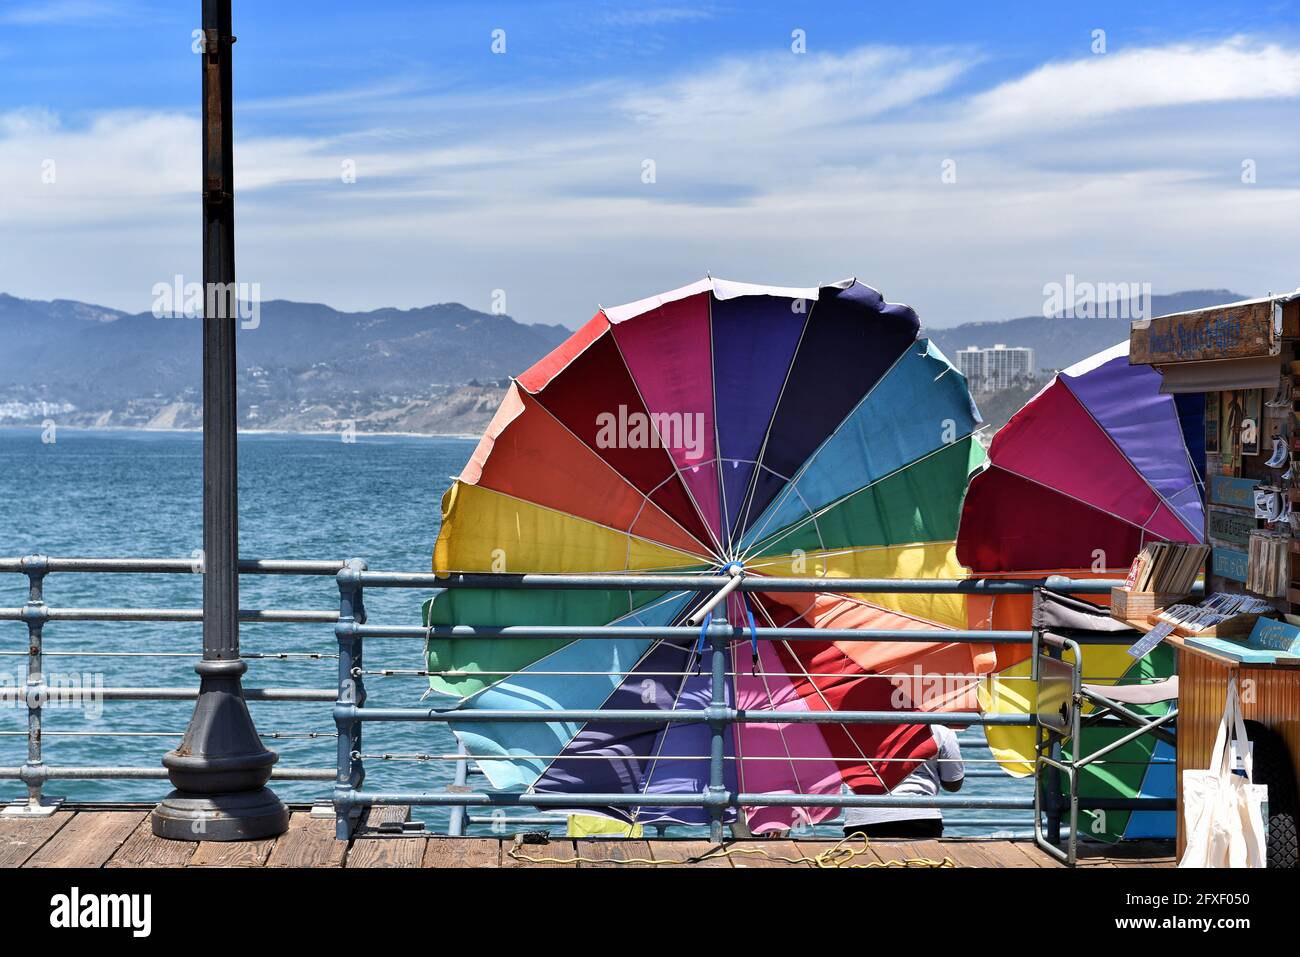 SANTA MONICA, CALIFORNIA - 25 MAY 2021: Colorful umbrellas on the Pier with the Santa Monica Mountains and Bay in the background. Stock Photo